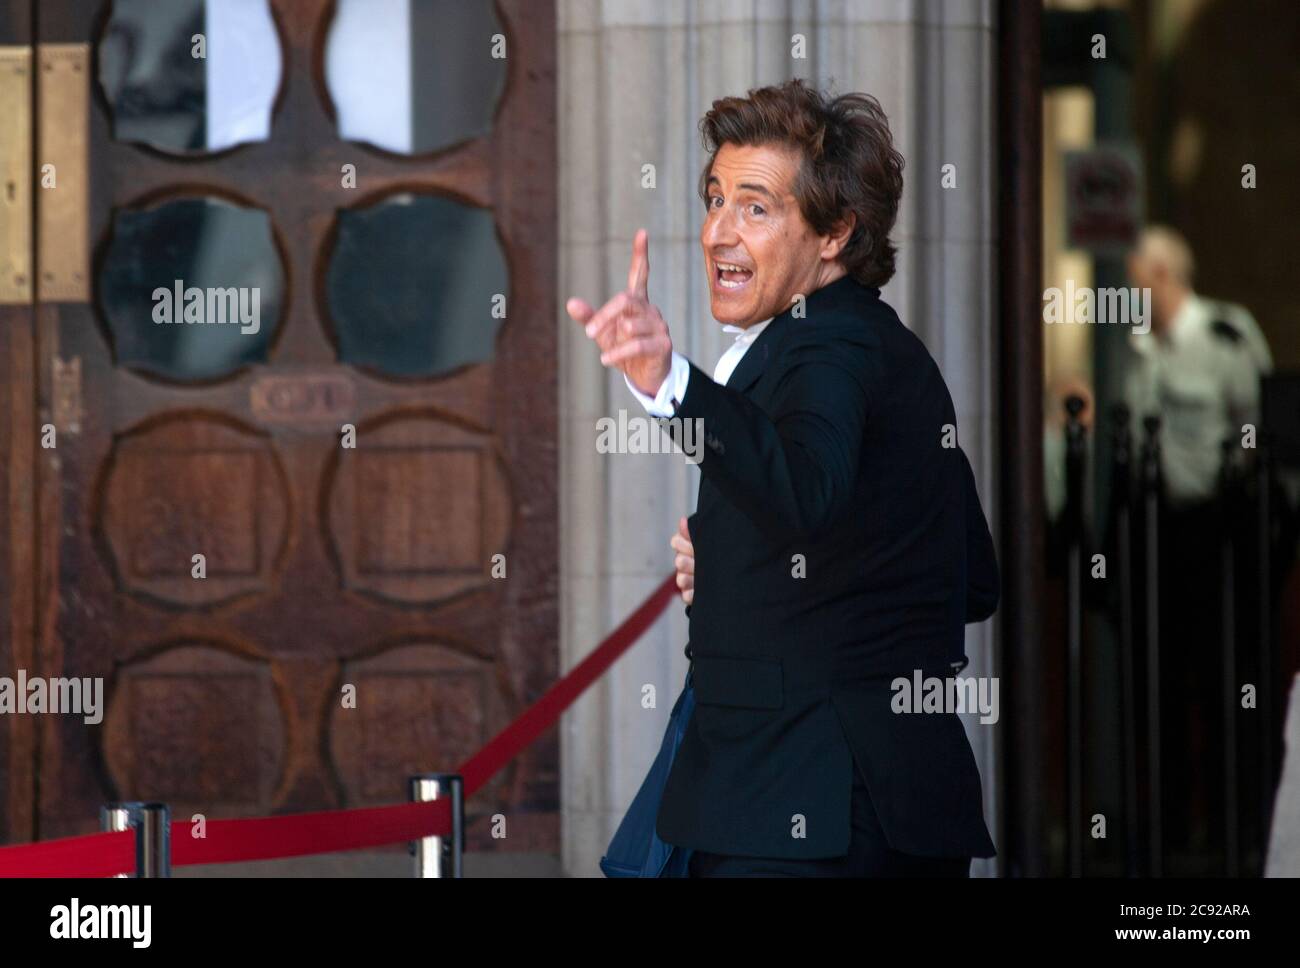 London, UK. 28th July 2020. English Barrister, David Sherborne, arrives at the high court, for day 16 of Johnny Depp’s libel trial against The Sun's publishers NGN. Credit: Neil Atkinson/Alamy Live News Stock Photo